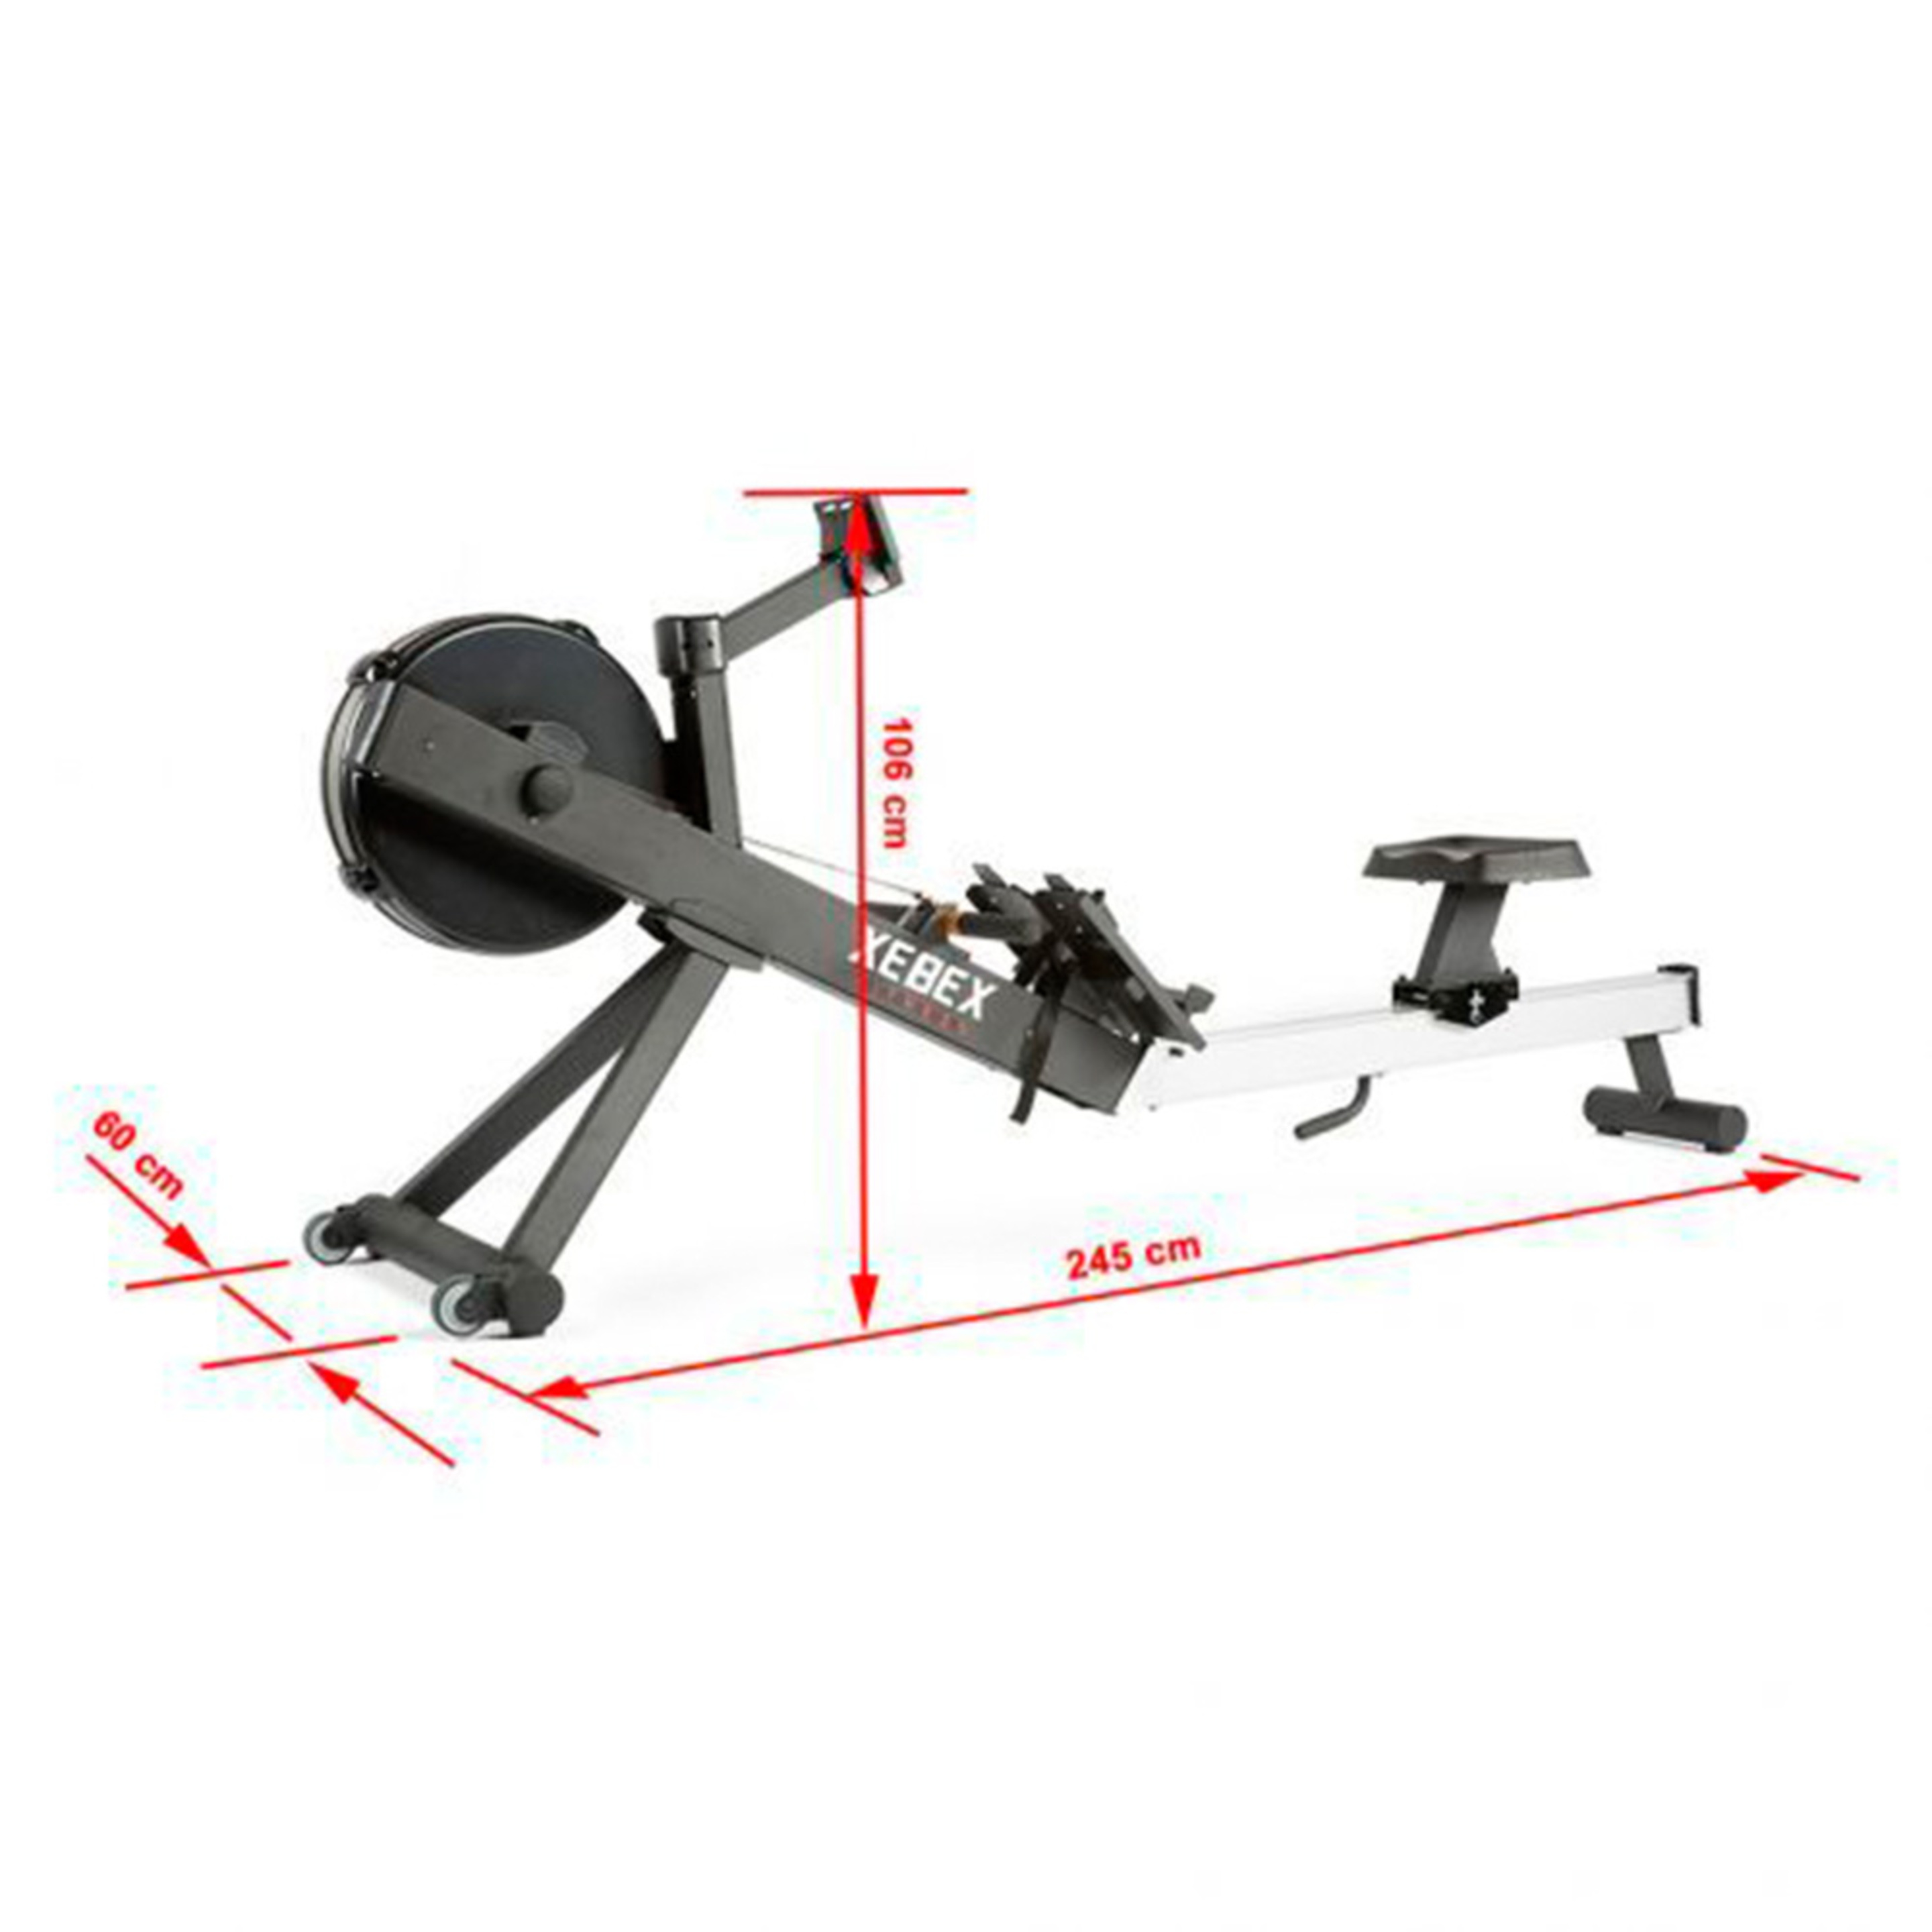 Xebex - Remo Air Rower 3.0